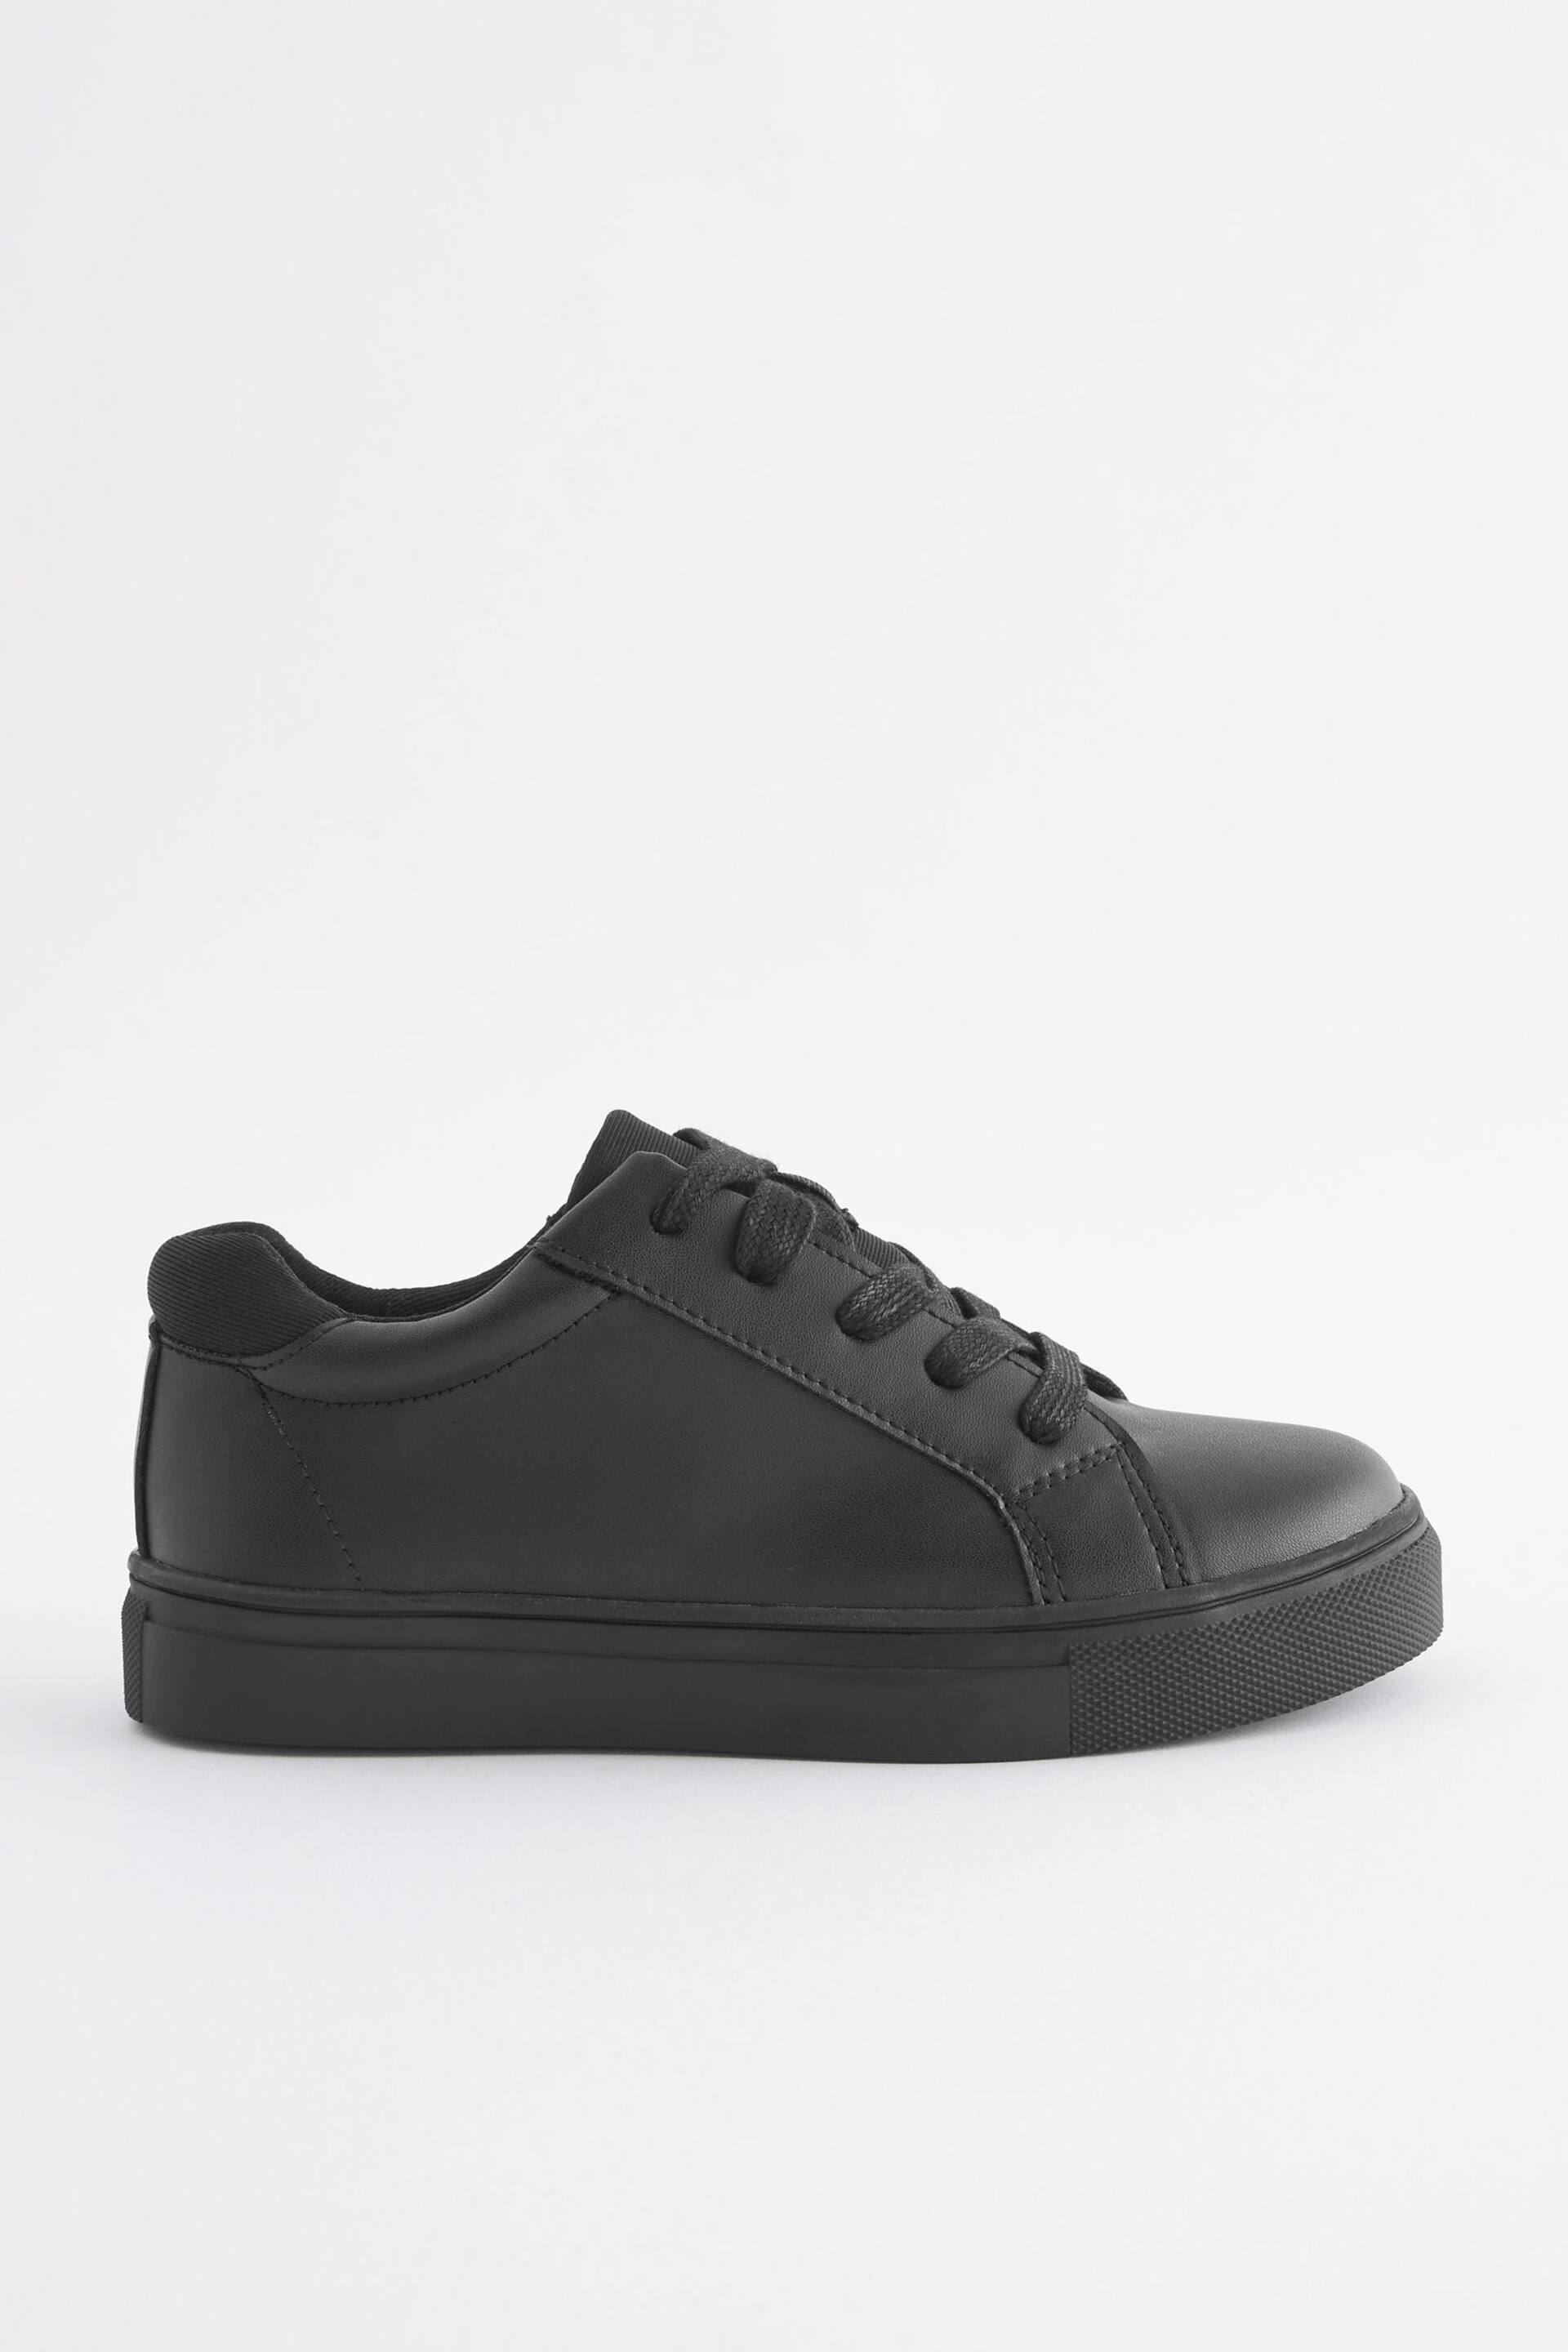 Black Standard Fit (F) Lace Up School Shoes - Image 2 of 5